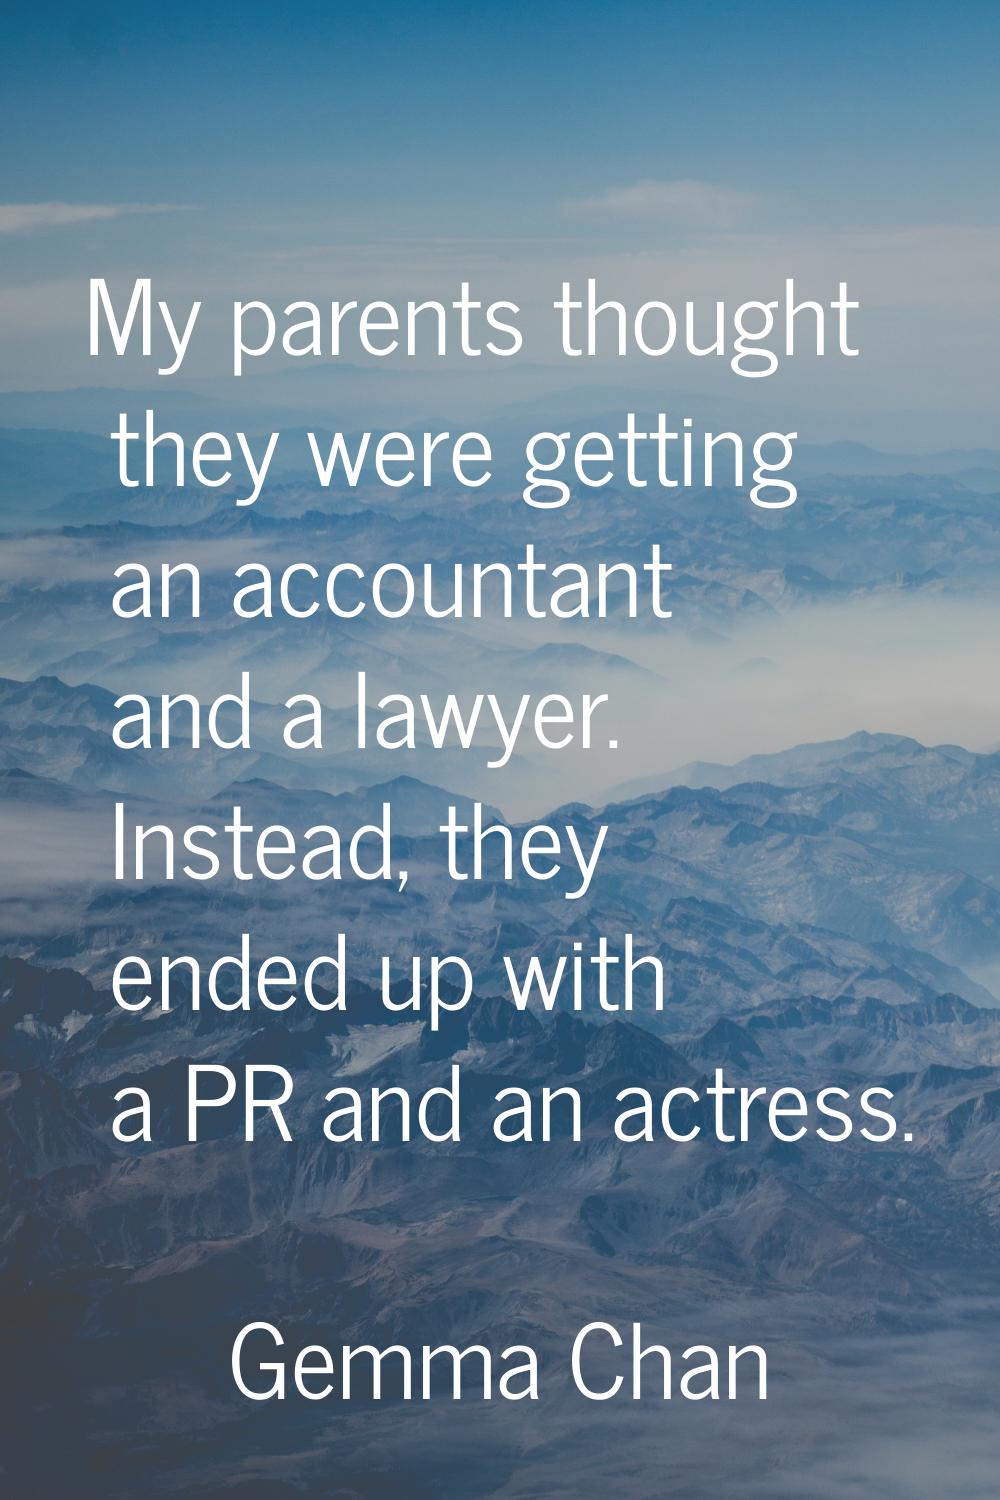 My parents thought they were getting an accountant and a lawyer. Instead, they ended up with a PR a